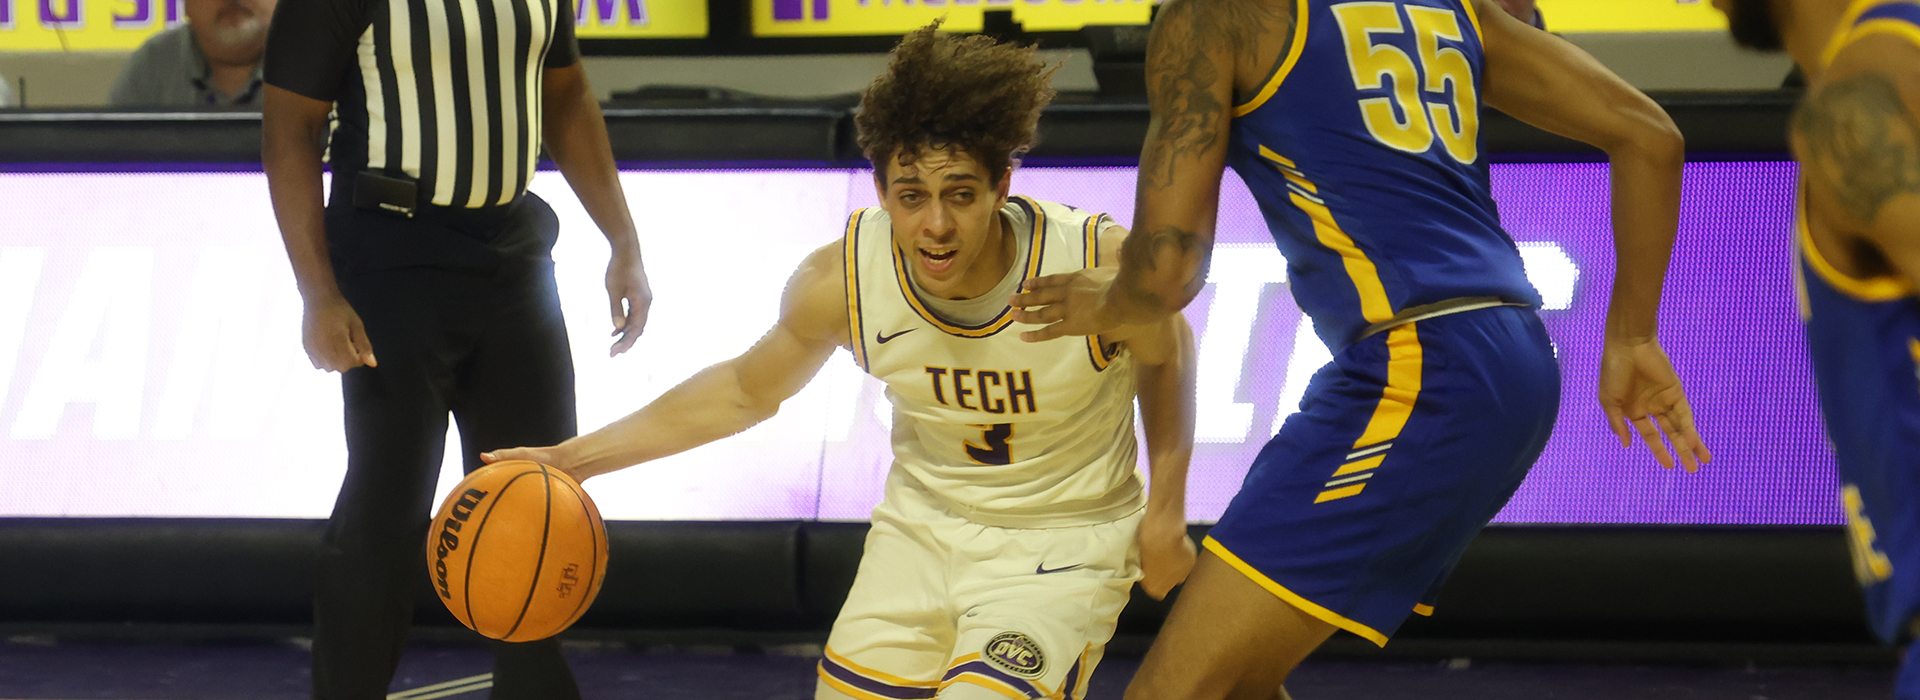 Late first-half run too much to overcome in Tech loss to Morehead State